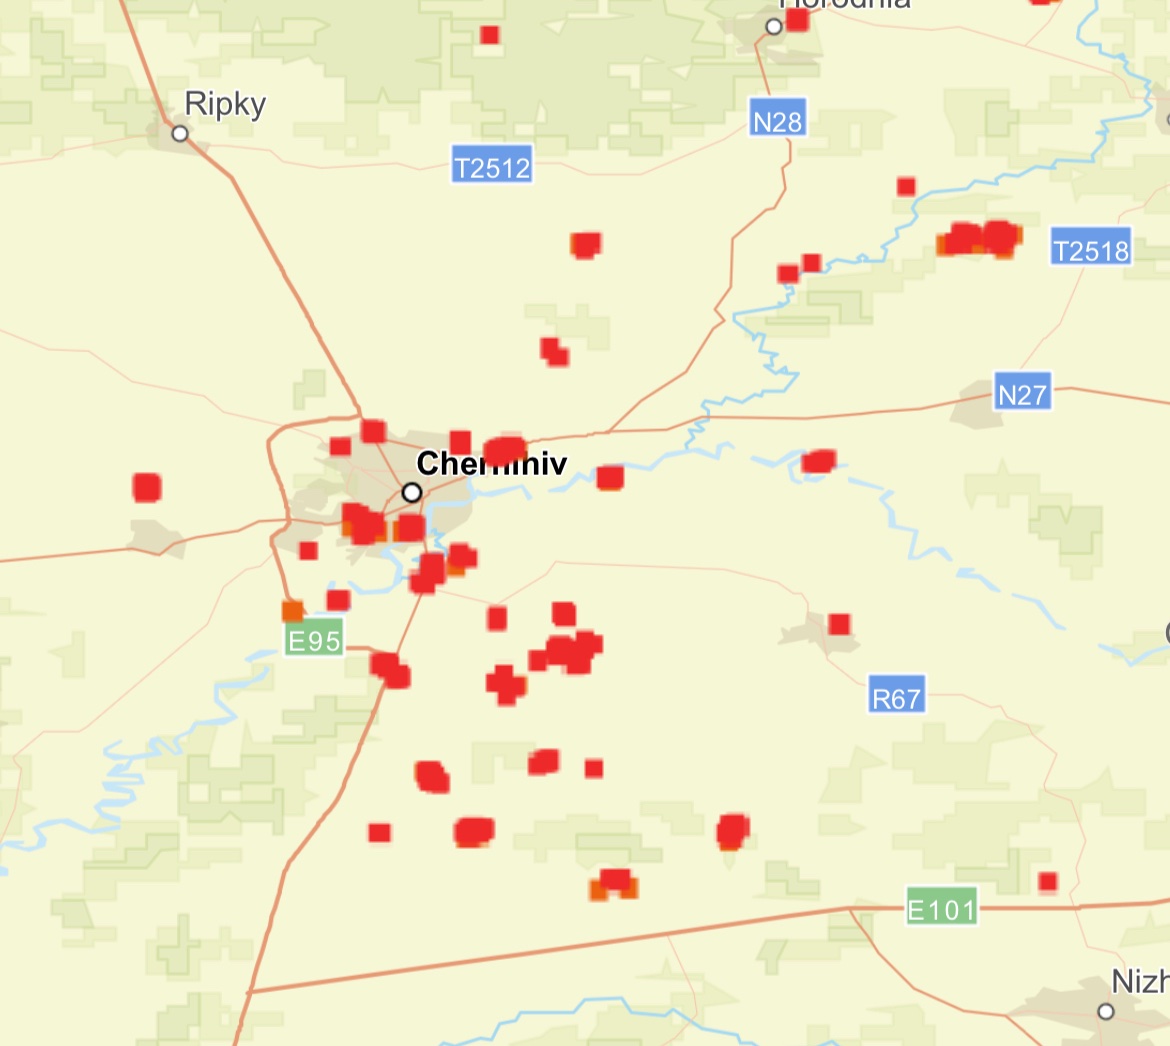 Fires detected by NASA's FIRMS in the last 24 hours near Kyiv, Chernihiv, and Mariupol